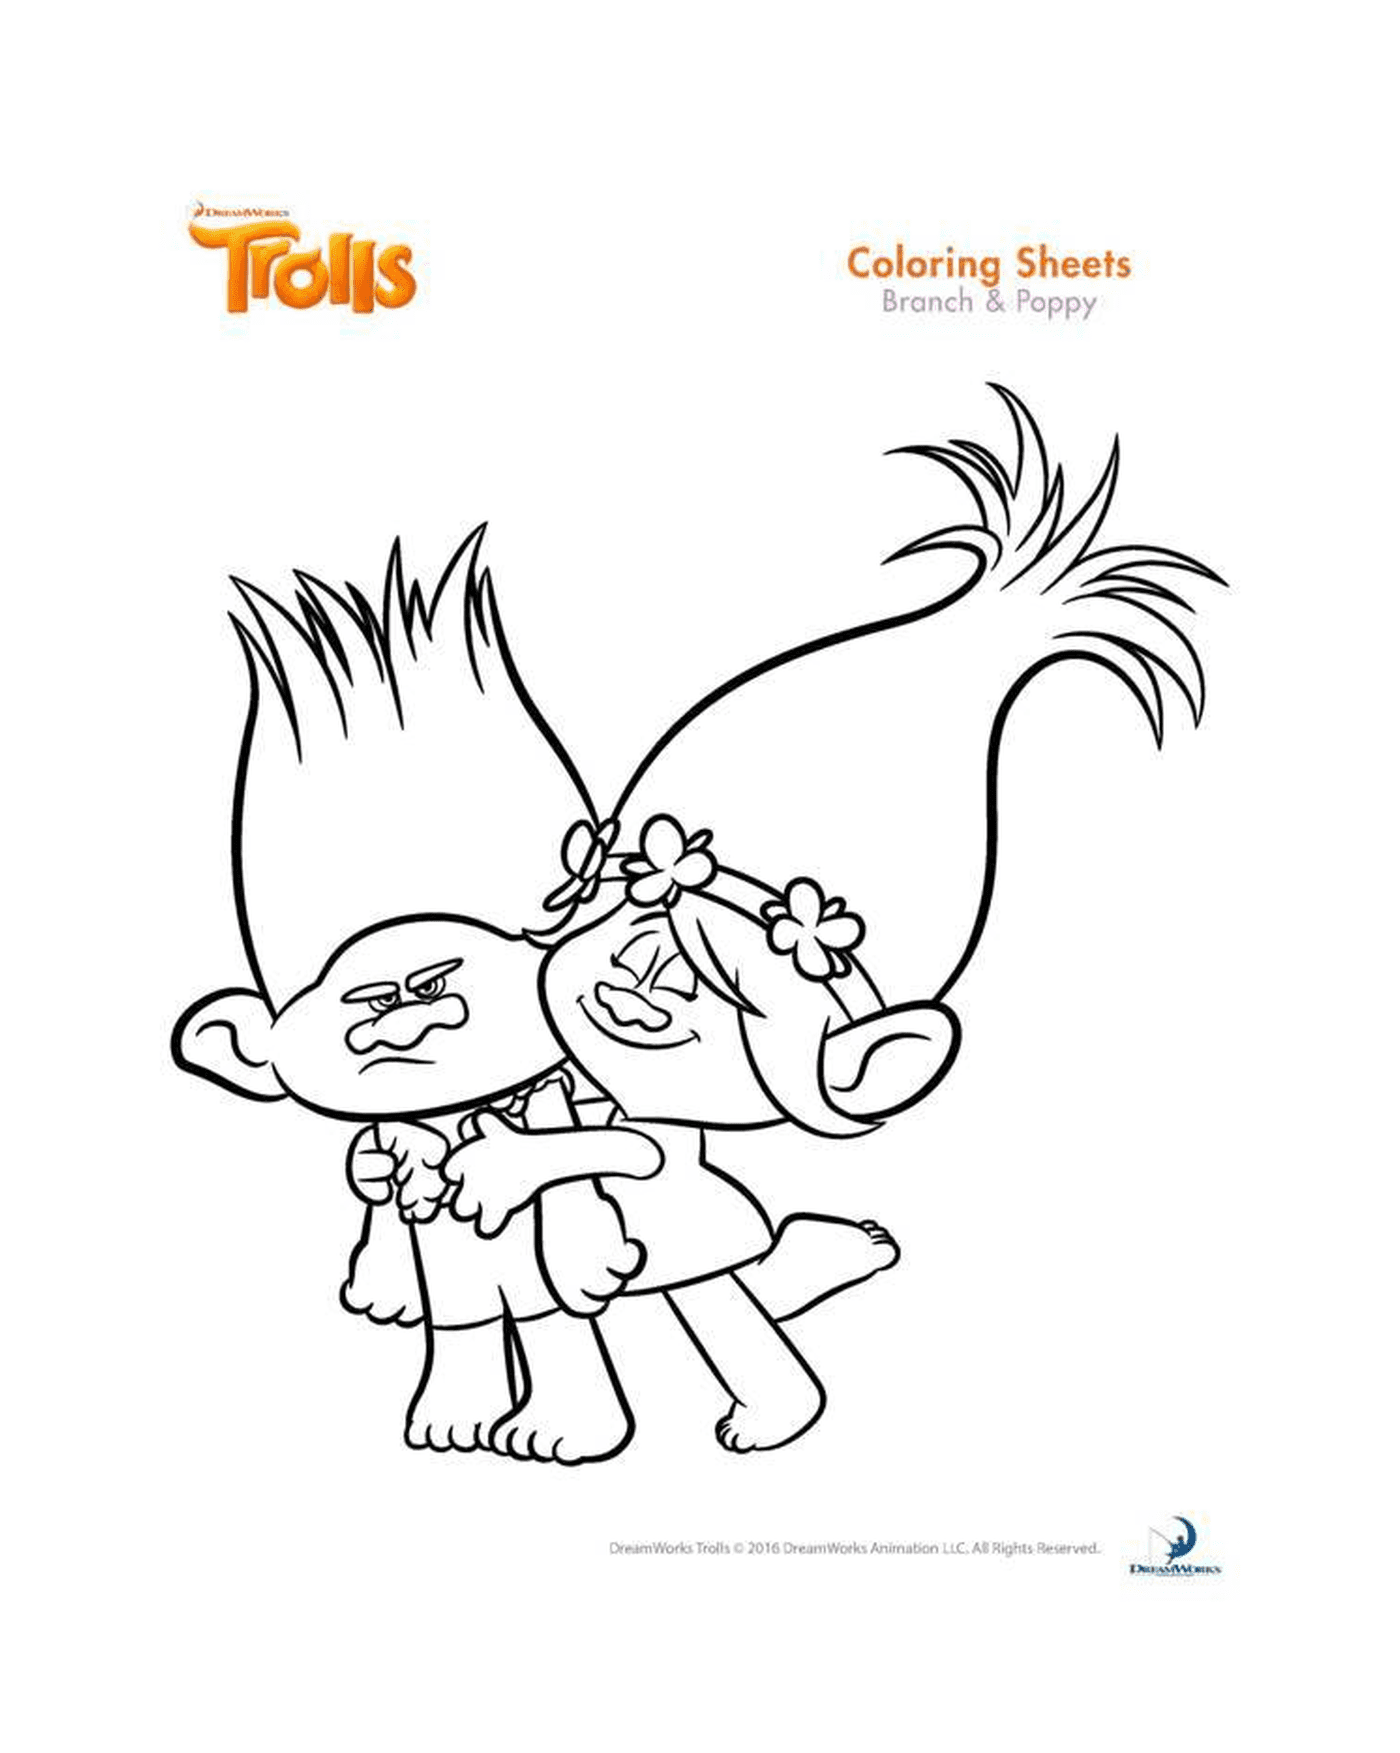 coloriage branch and poppy trolls